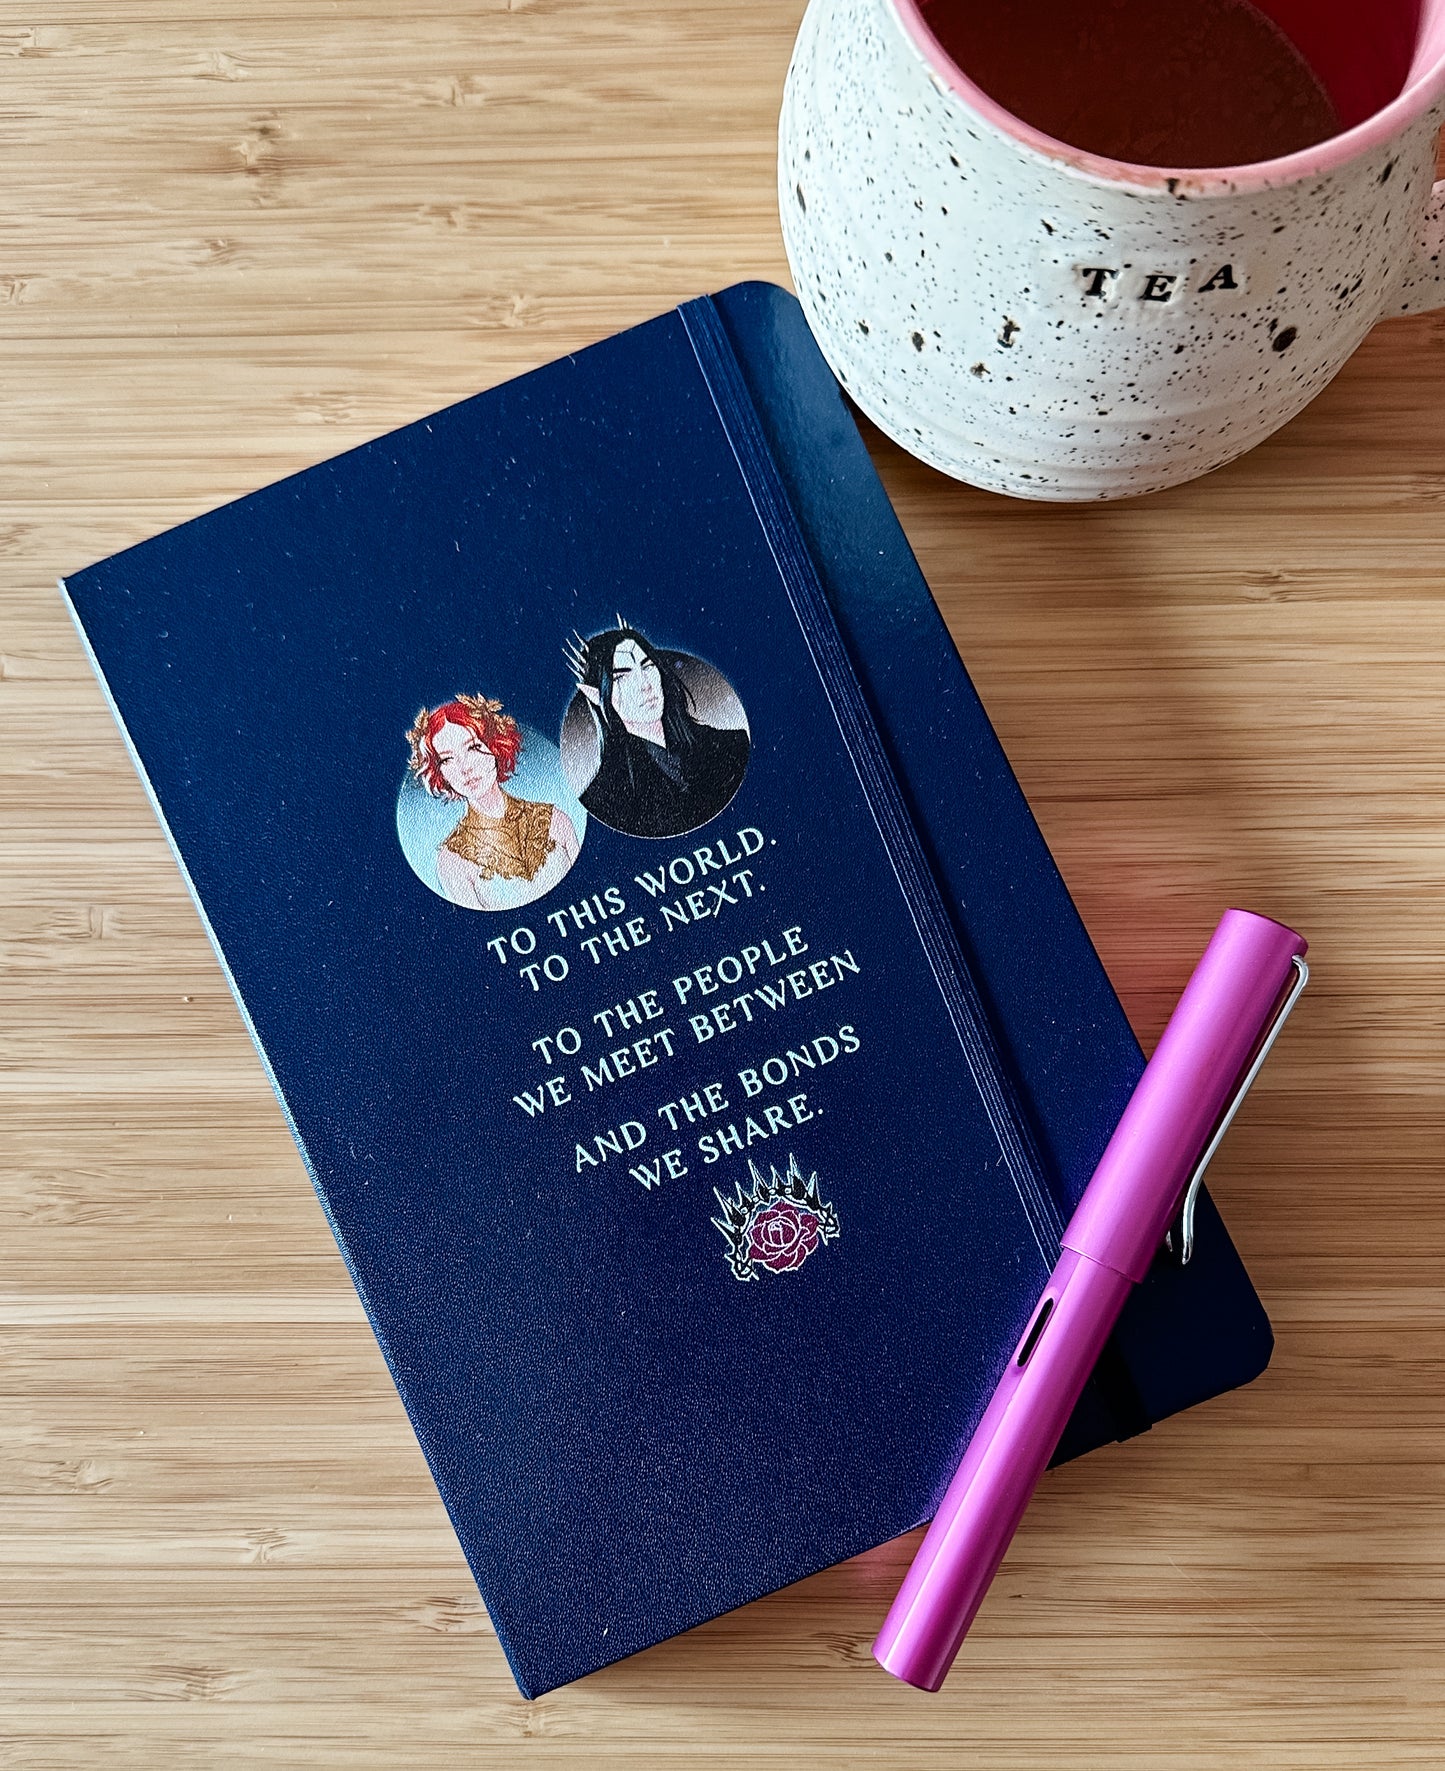 "To This World..." Luella and Eldas Hardcover Notebook